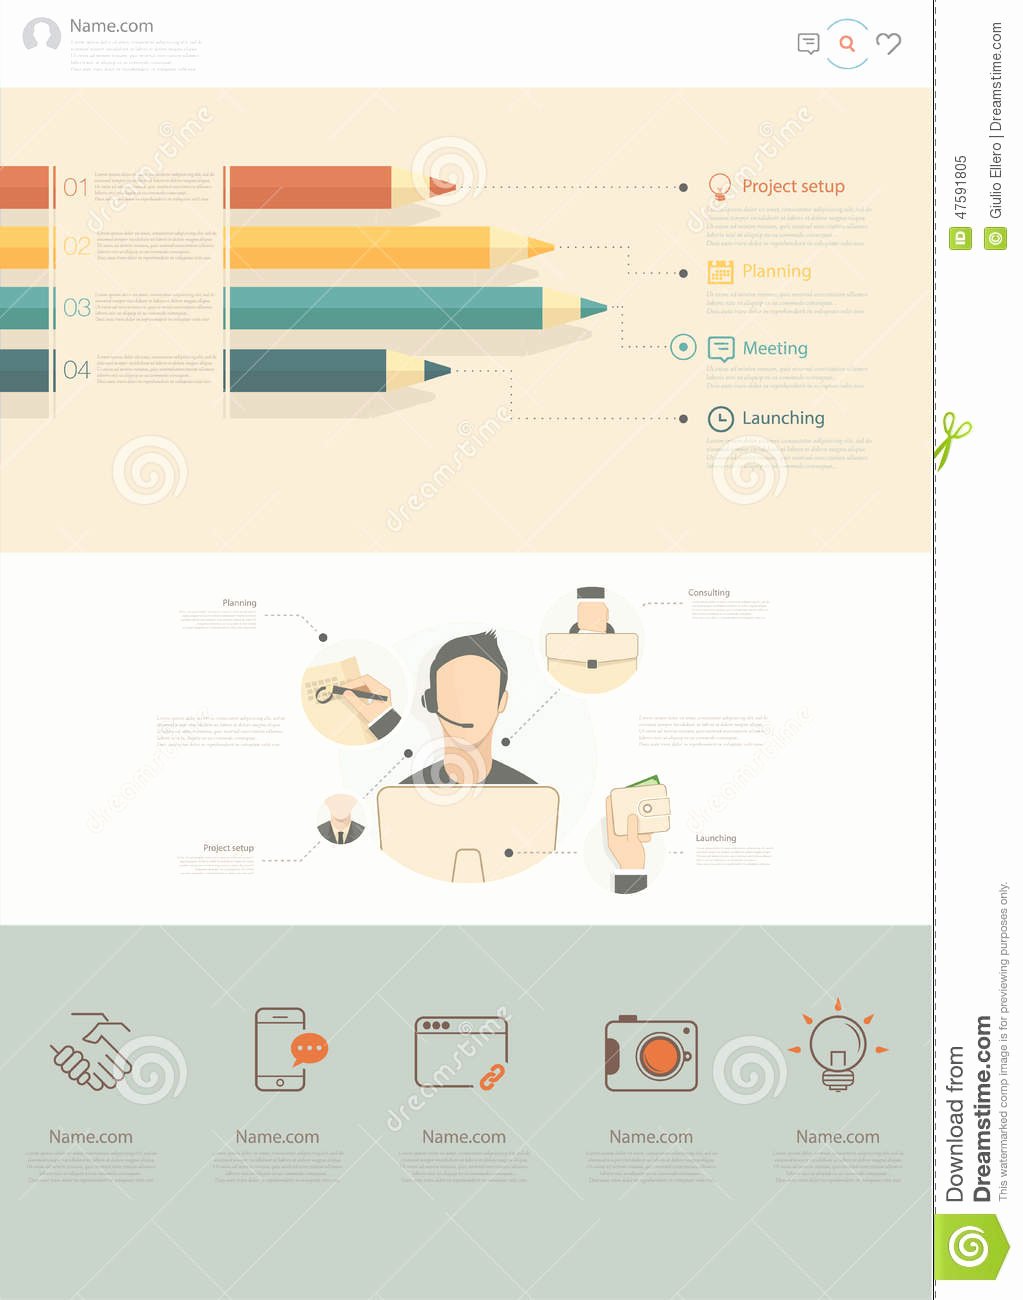 Business One Sheet Template Best Of Flat Website Design Template with Business Illustrations